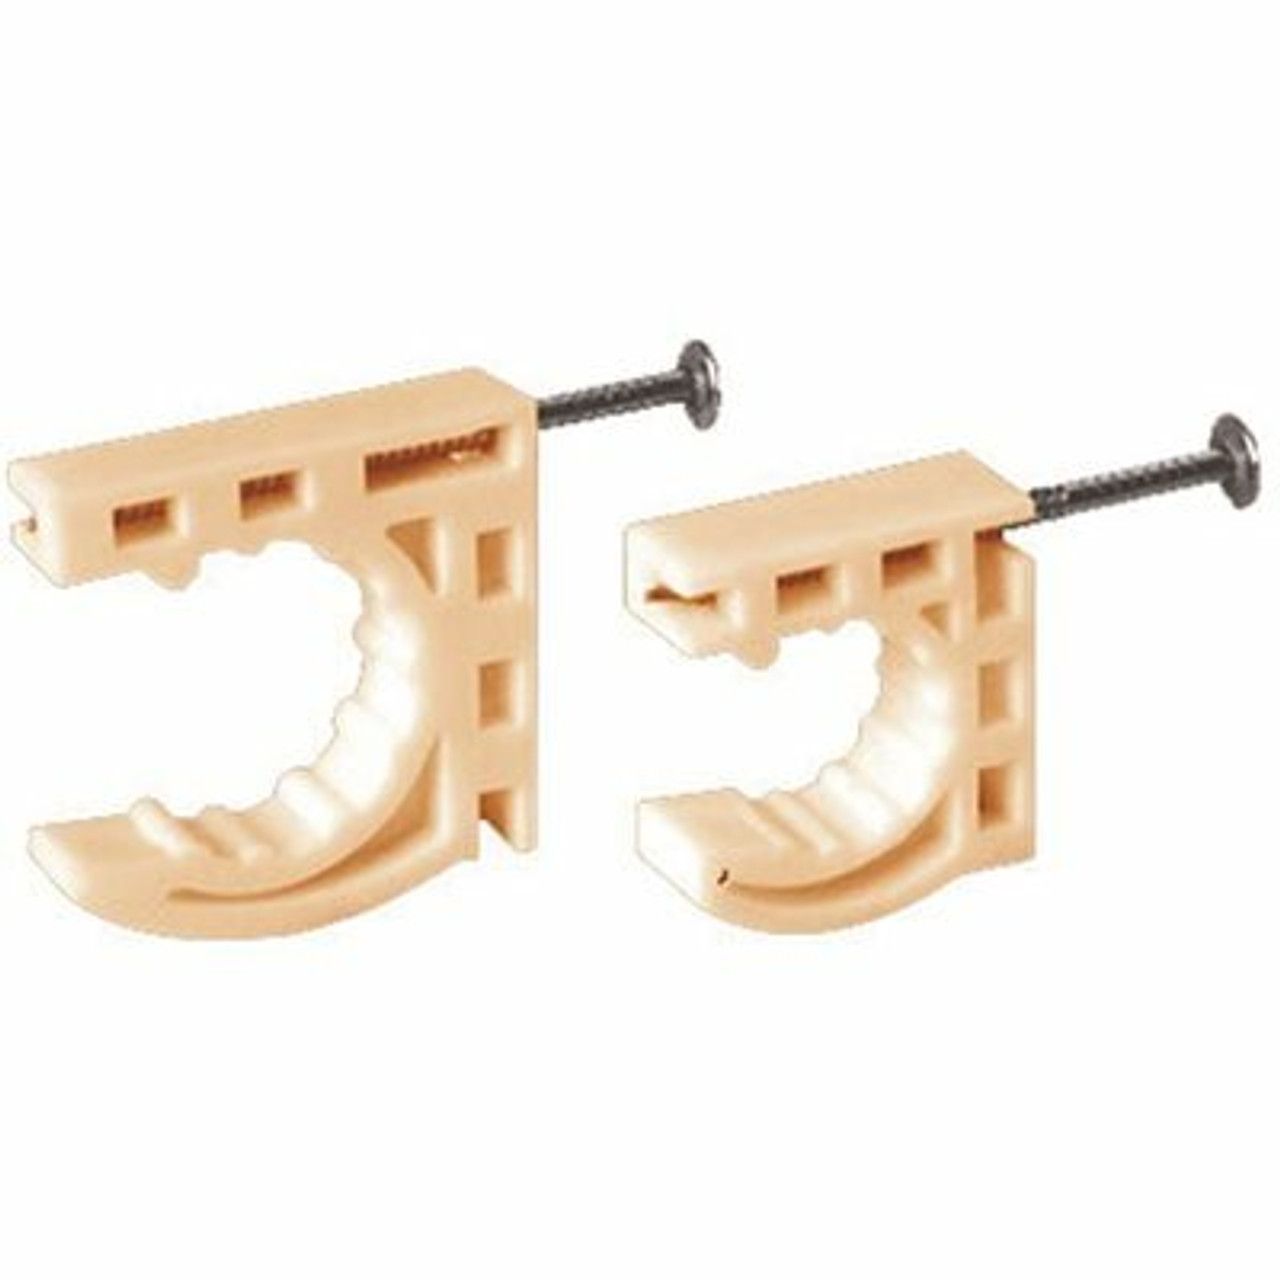 Ips Corporation Ips Right Strap Multi-Functional Pipe Clamp With Preloaded Nail, 1/2 In. Cts (50-Pack)